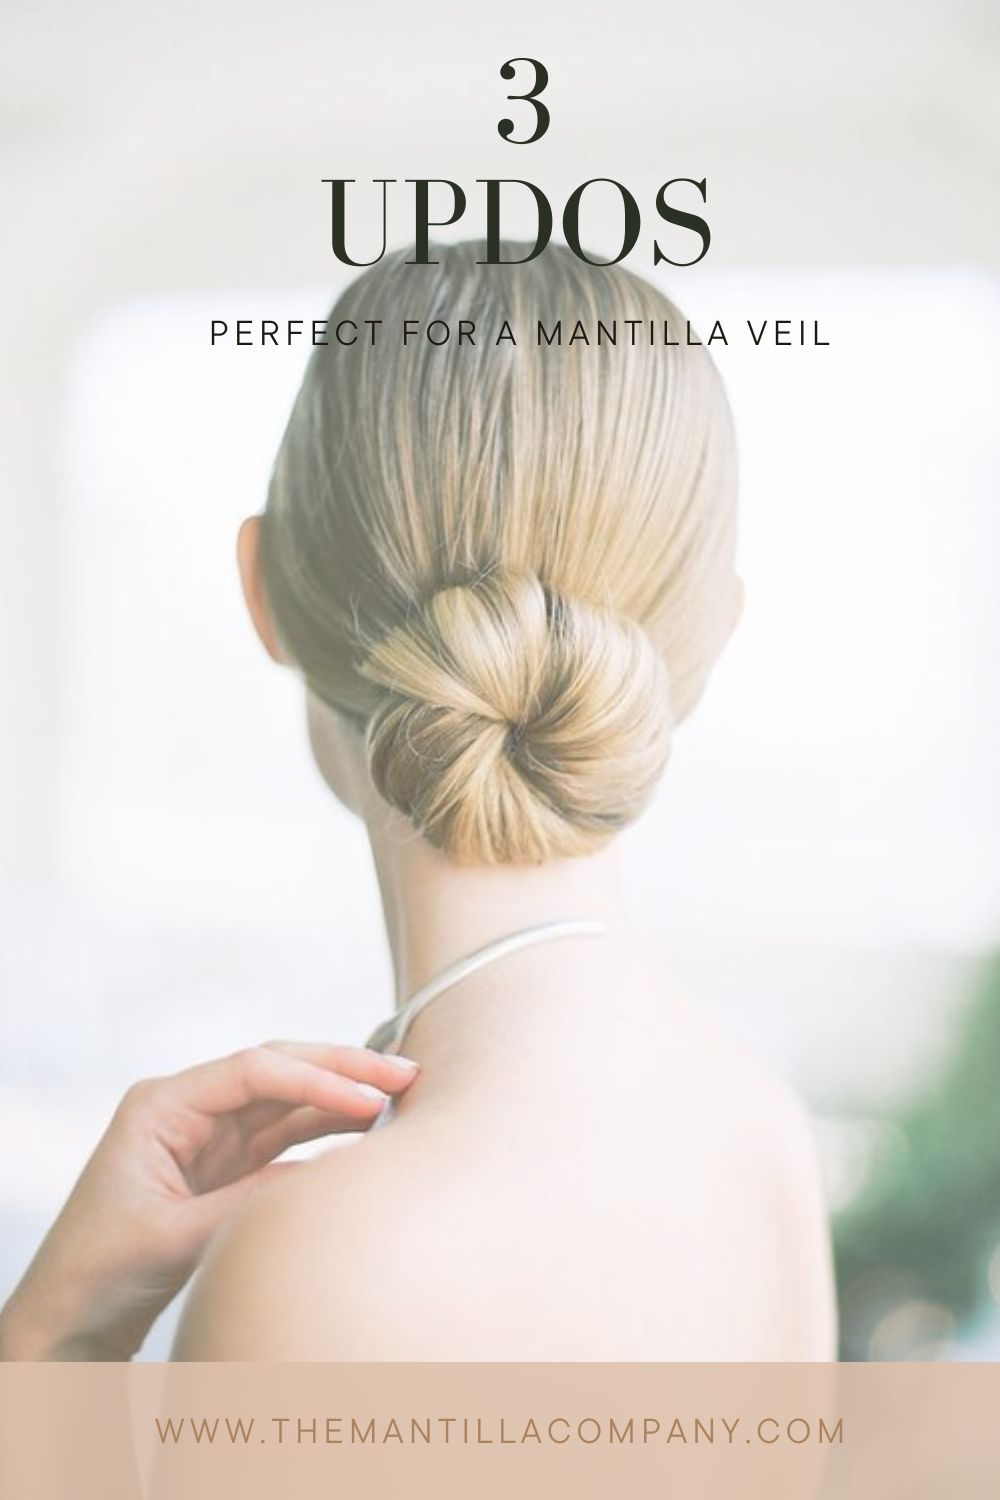 wedding hairstyles with braids and veil